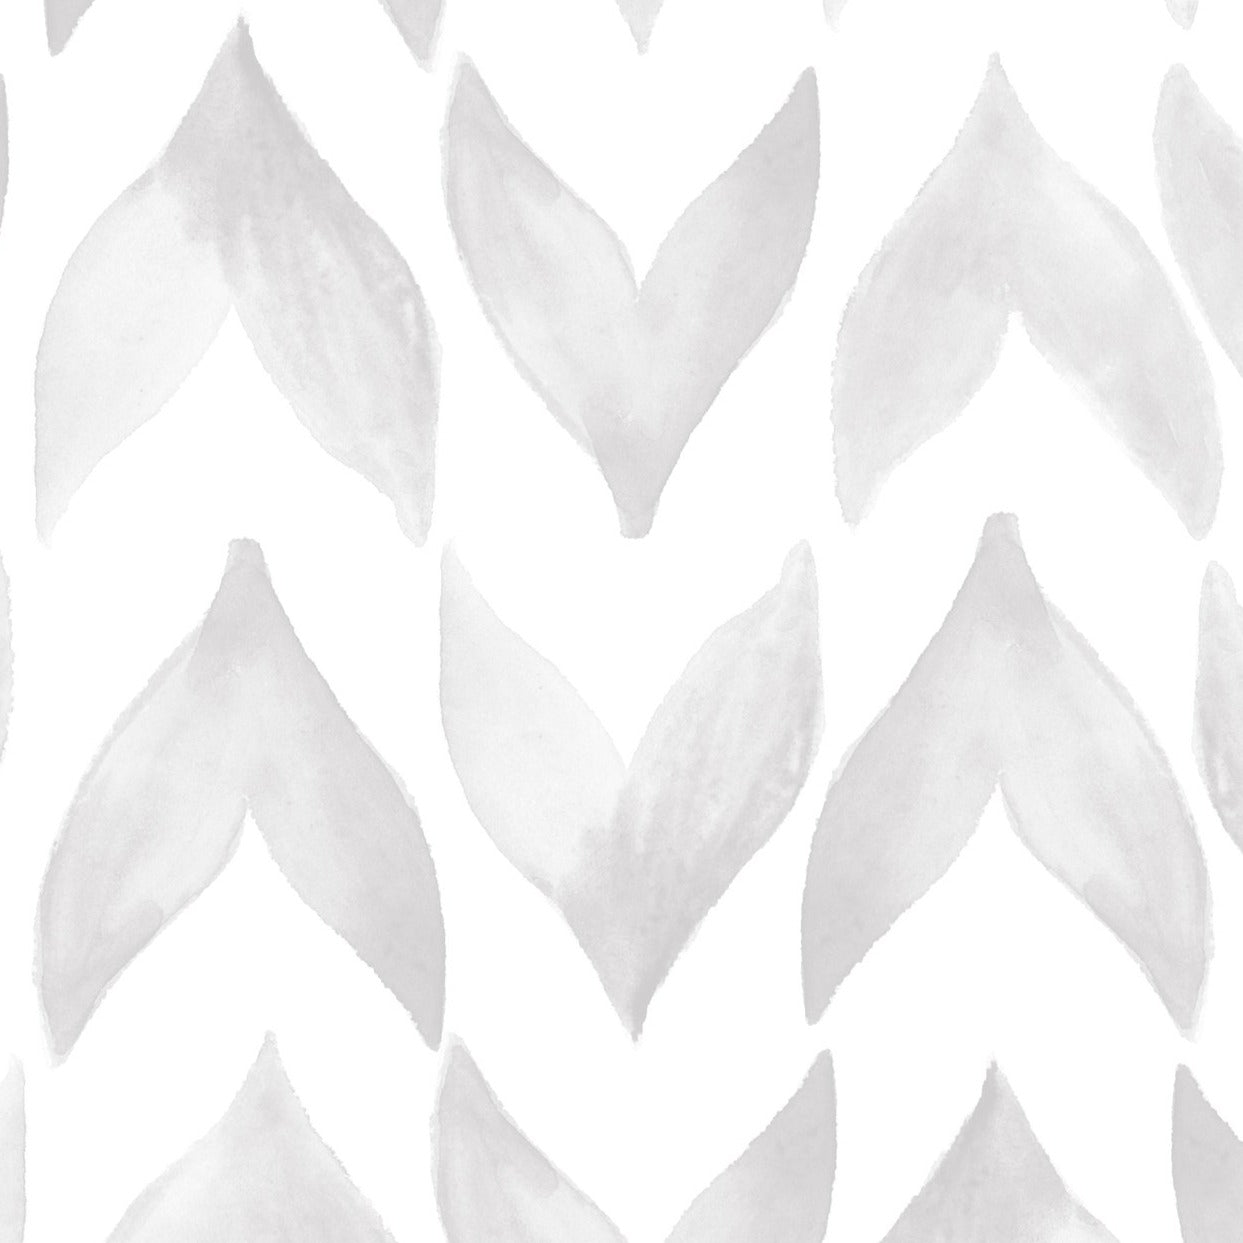 A close-up view of Moroccan Tile Wallpaper showing a watercolor effect with varying intensities of grey, resembling a mist or fog, on a white background with a hand-painted look.